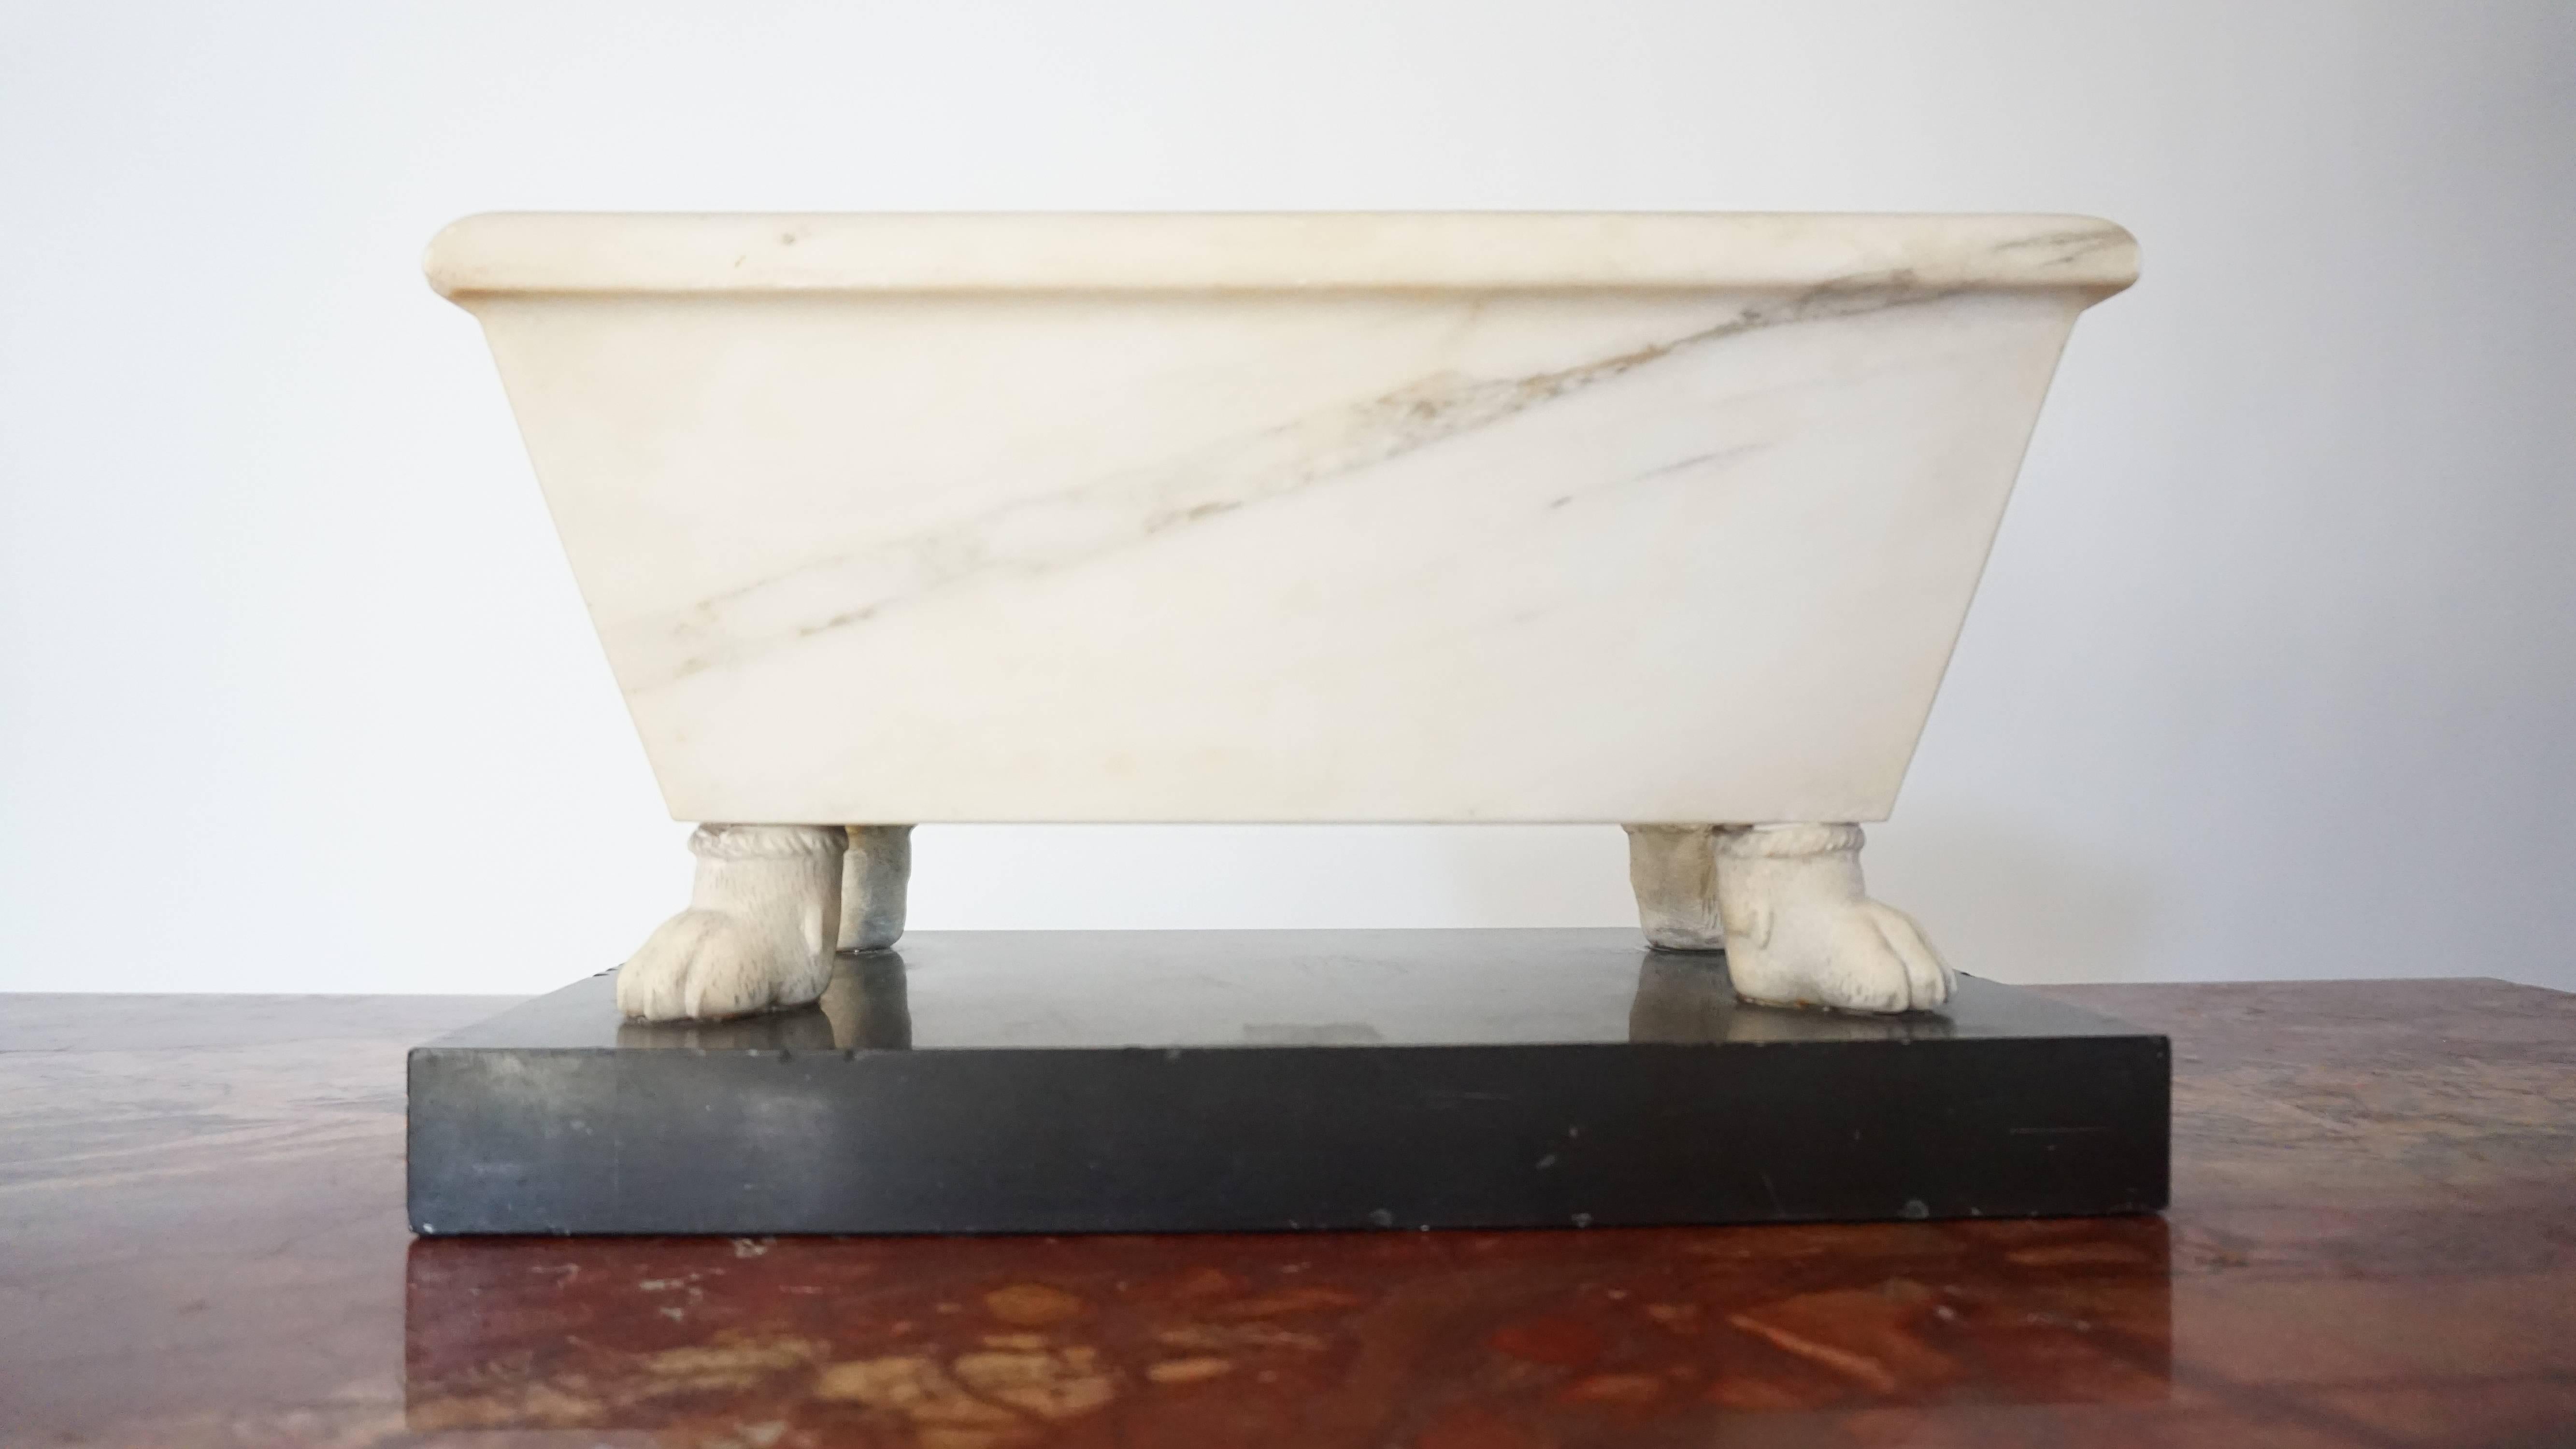 A rare and exquisite circa 1820 early Italian Grand Tour model of a Roman Lavacrum or 'bath' of unusually large size; the rectangular tub with tapering sides of carved solid Proconnesian marble (Marmo proconnesio) on delicately carved hairy paw feet